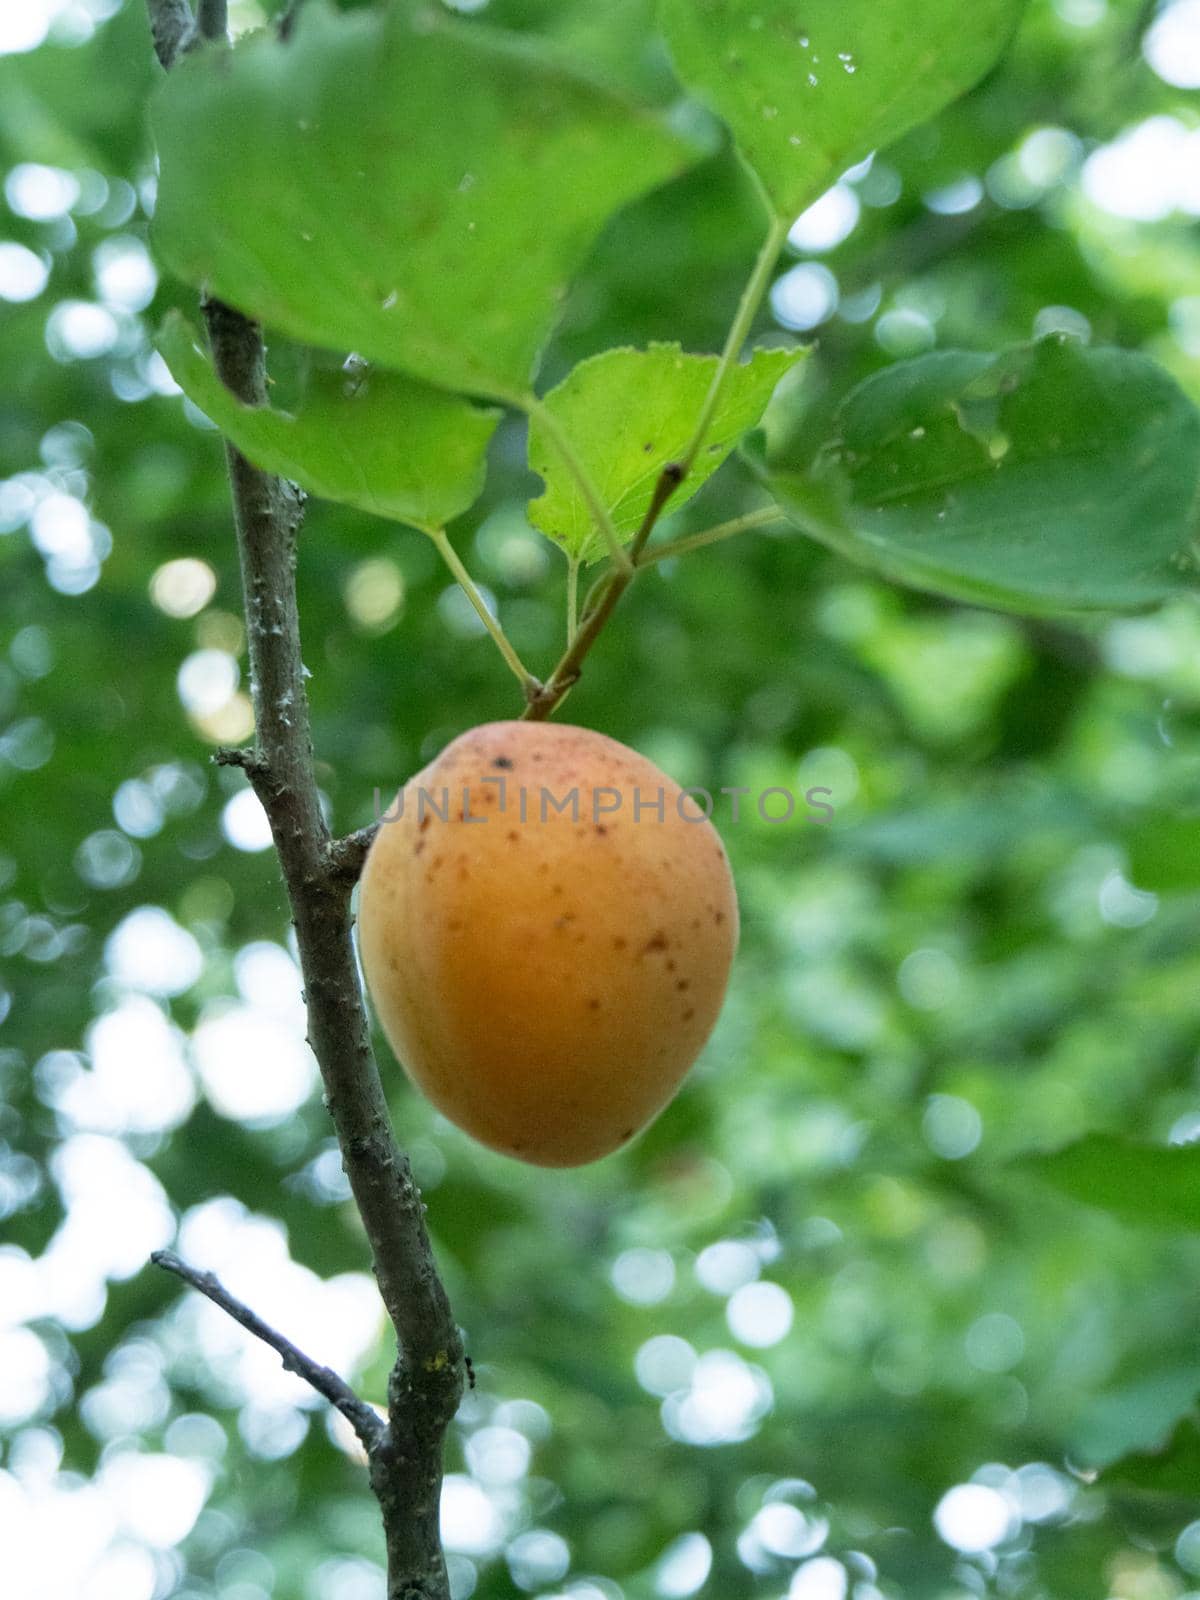 yellow orange apricots hang and ripen on a tree branch in the garden in summer